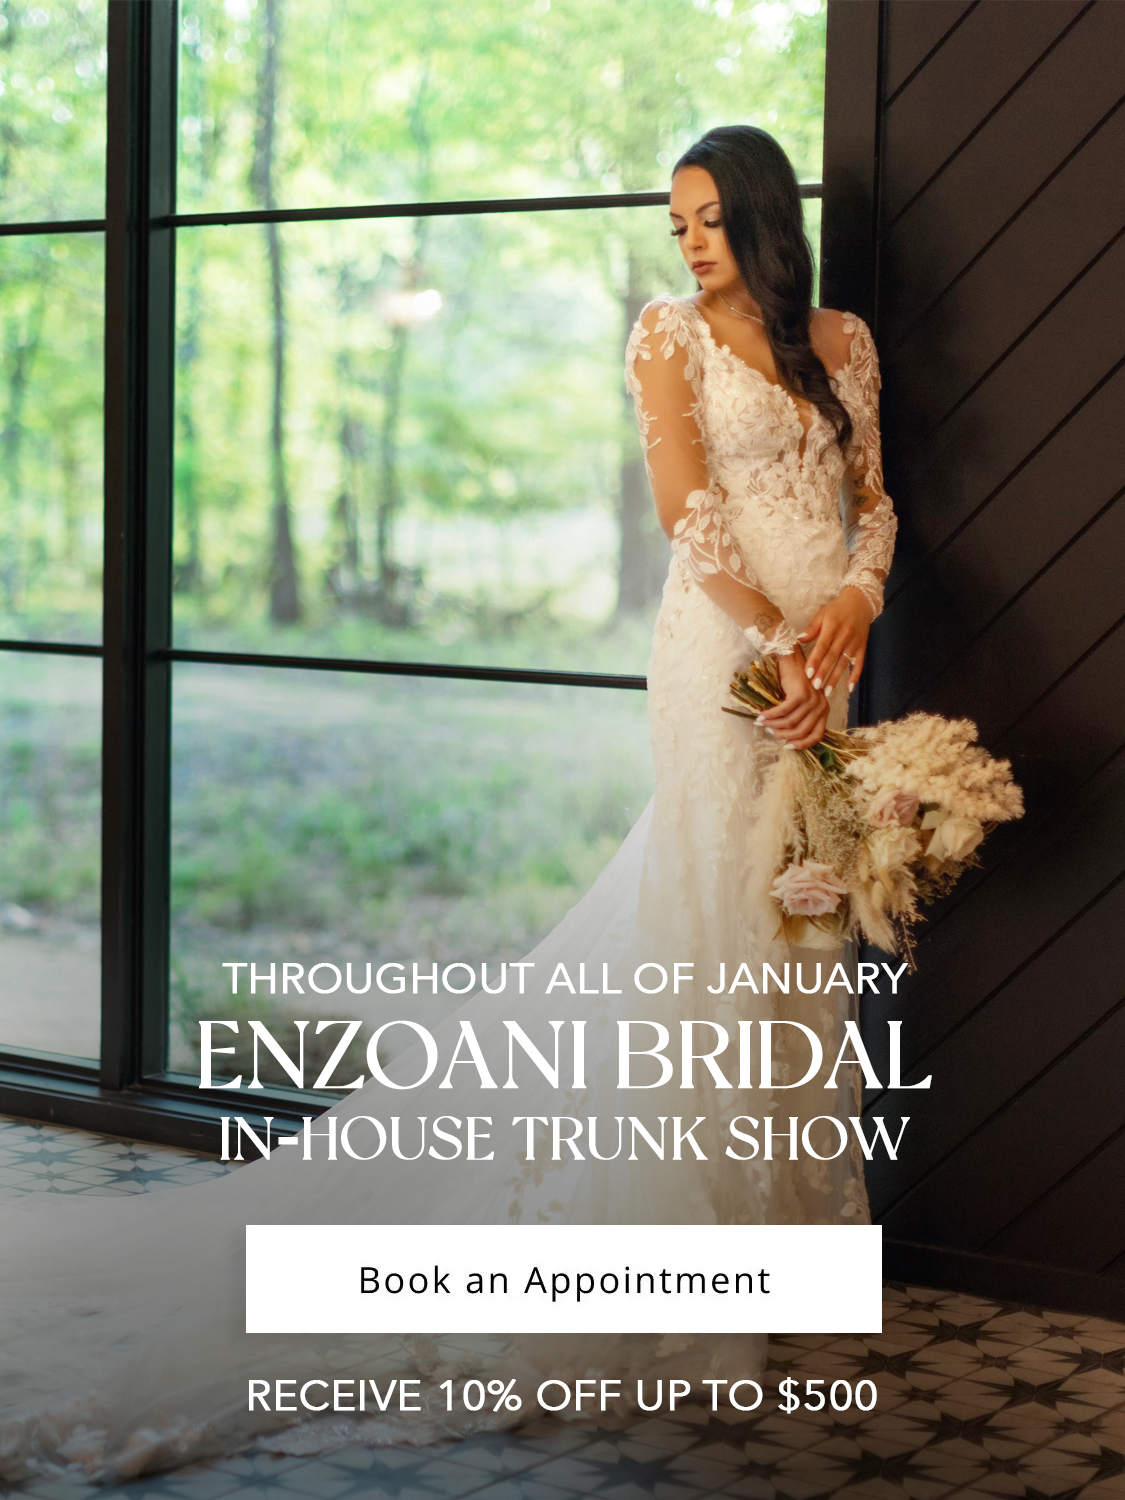 Enzoani Bridal In-House Trunk Show